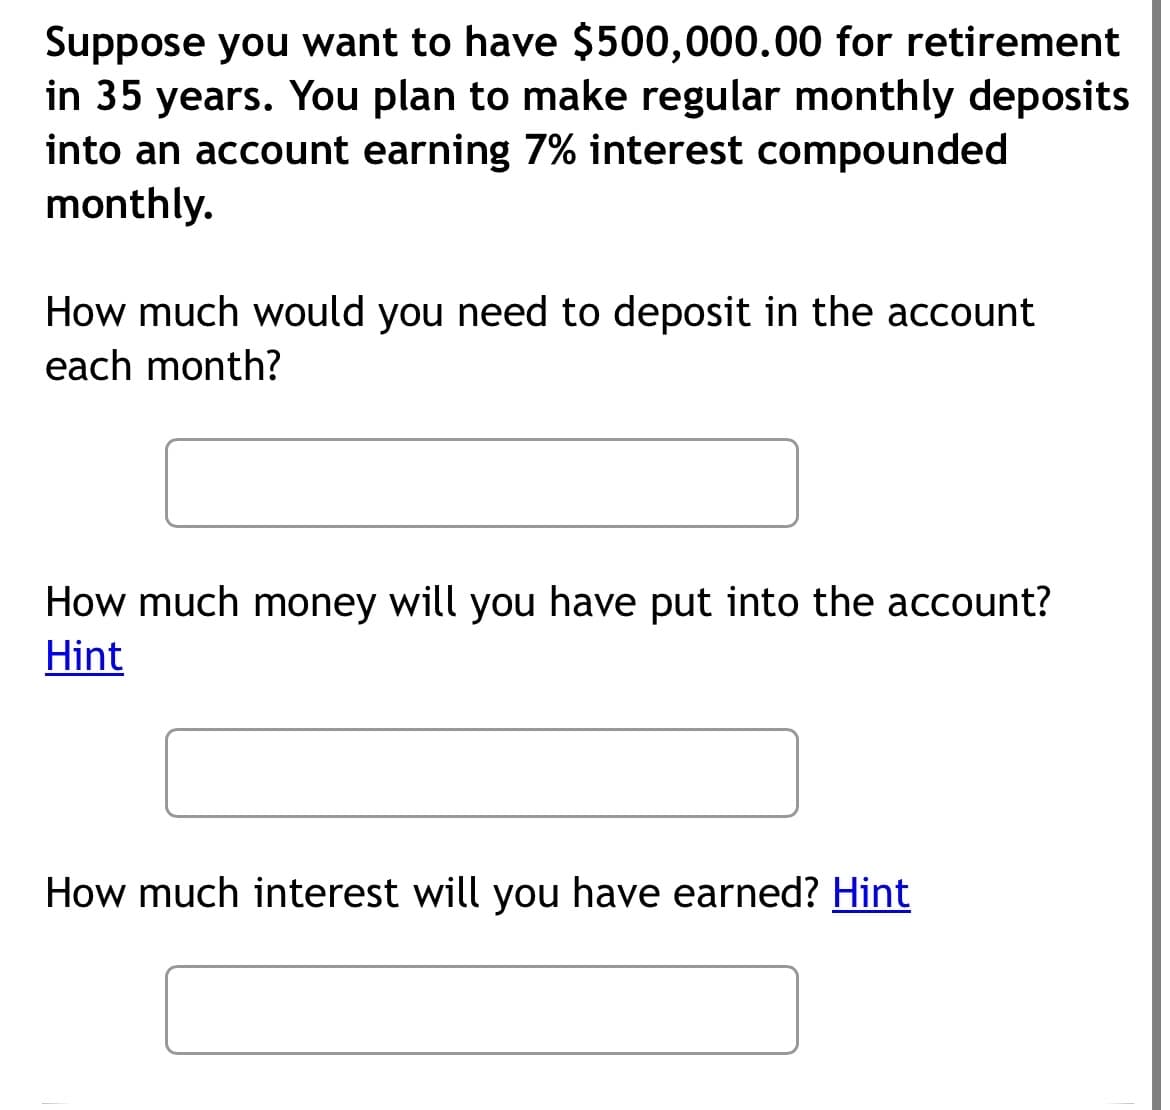 Suppose you want to have $500,000.00 for retirement
in 35 years. You plan to make regular monthly deposits
into an account earning 7% interest compounded
monthly.
How much would you need to deposit in the account
each month?
How much money will you have put into the account?
Hint
How much interest will you have earned? Hint